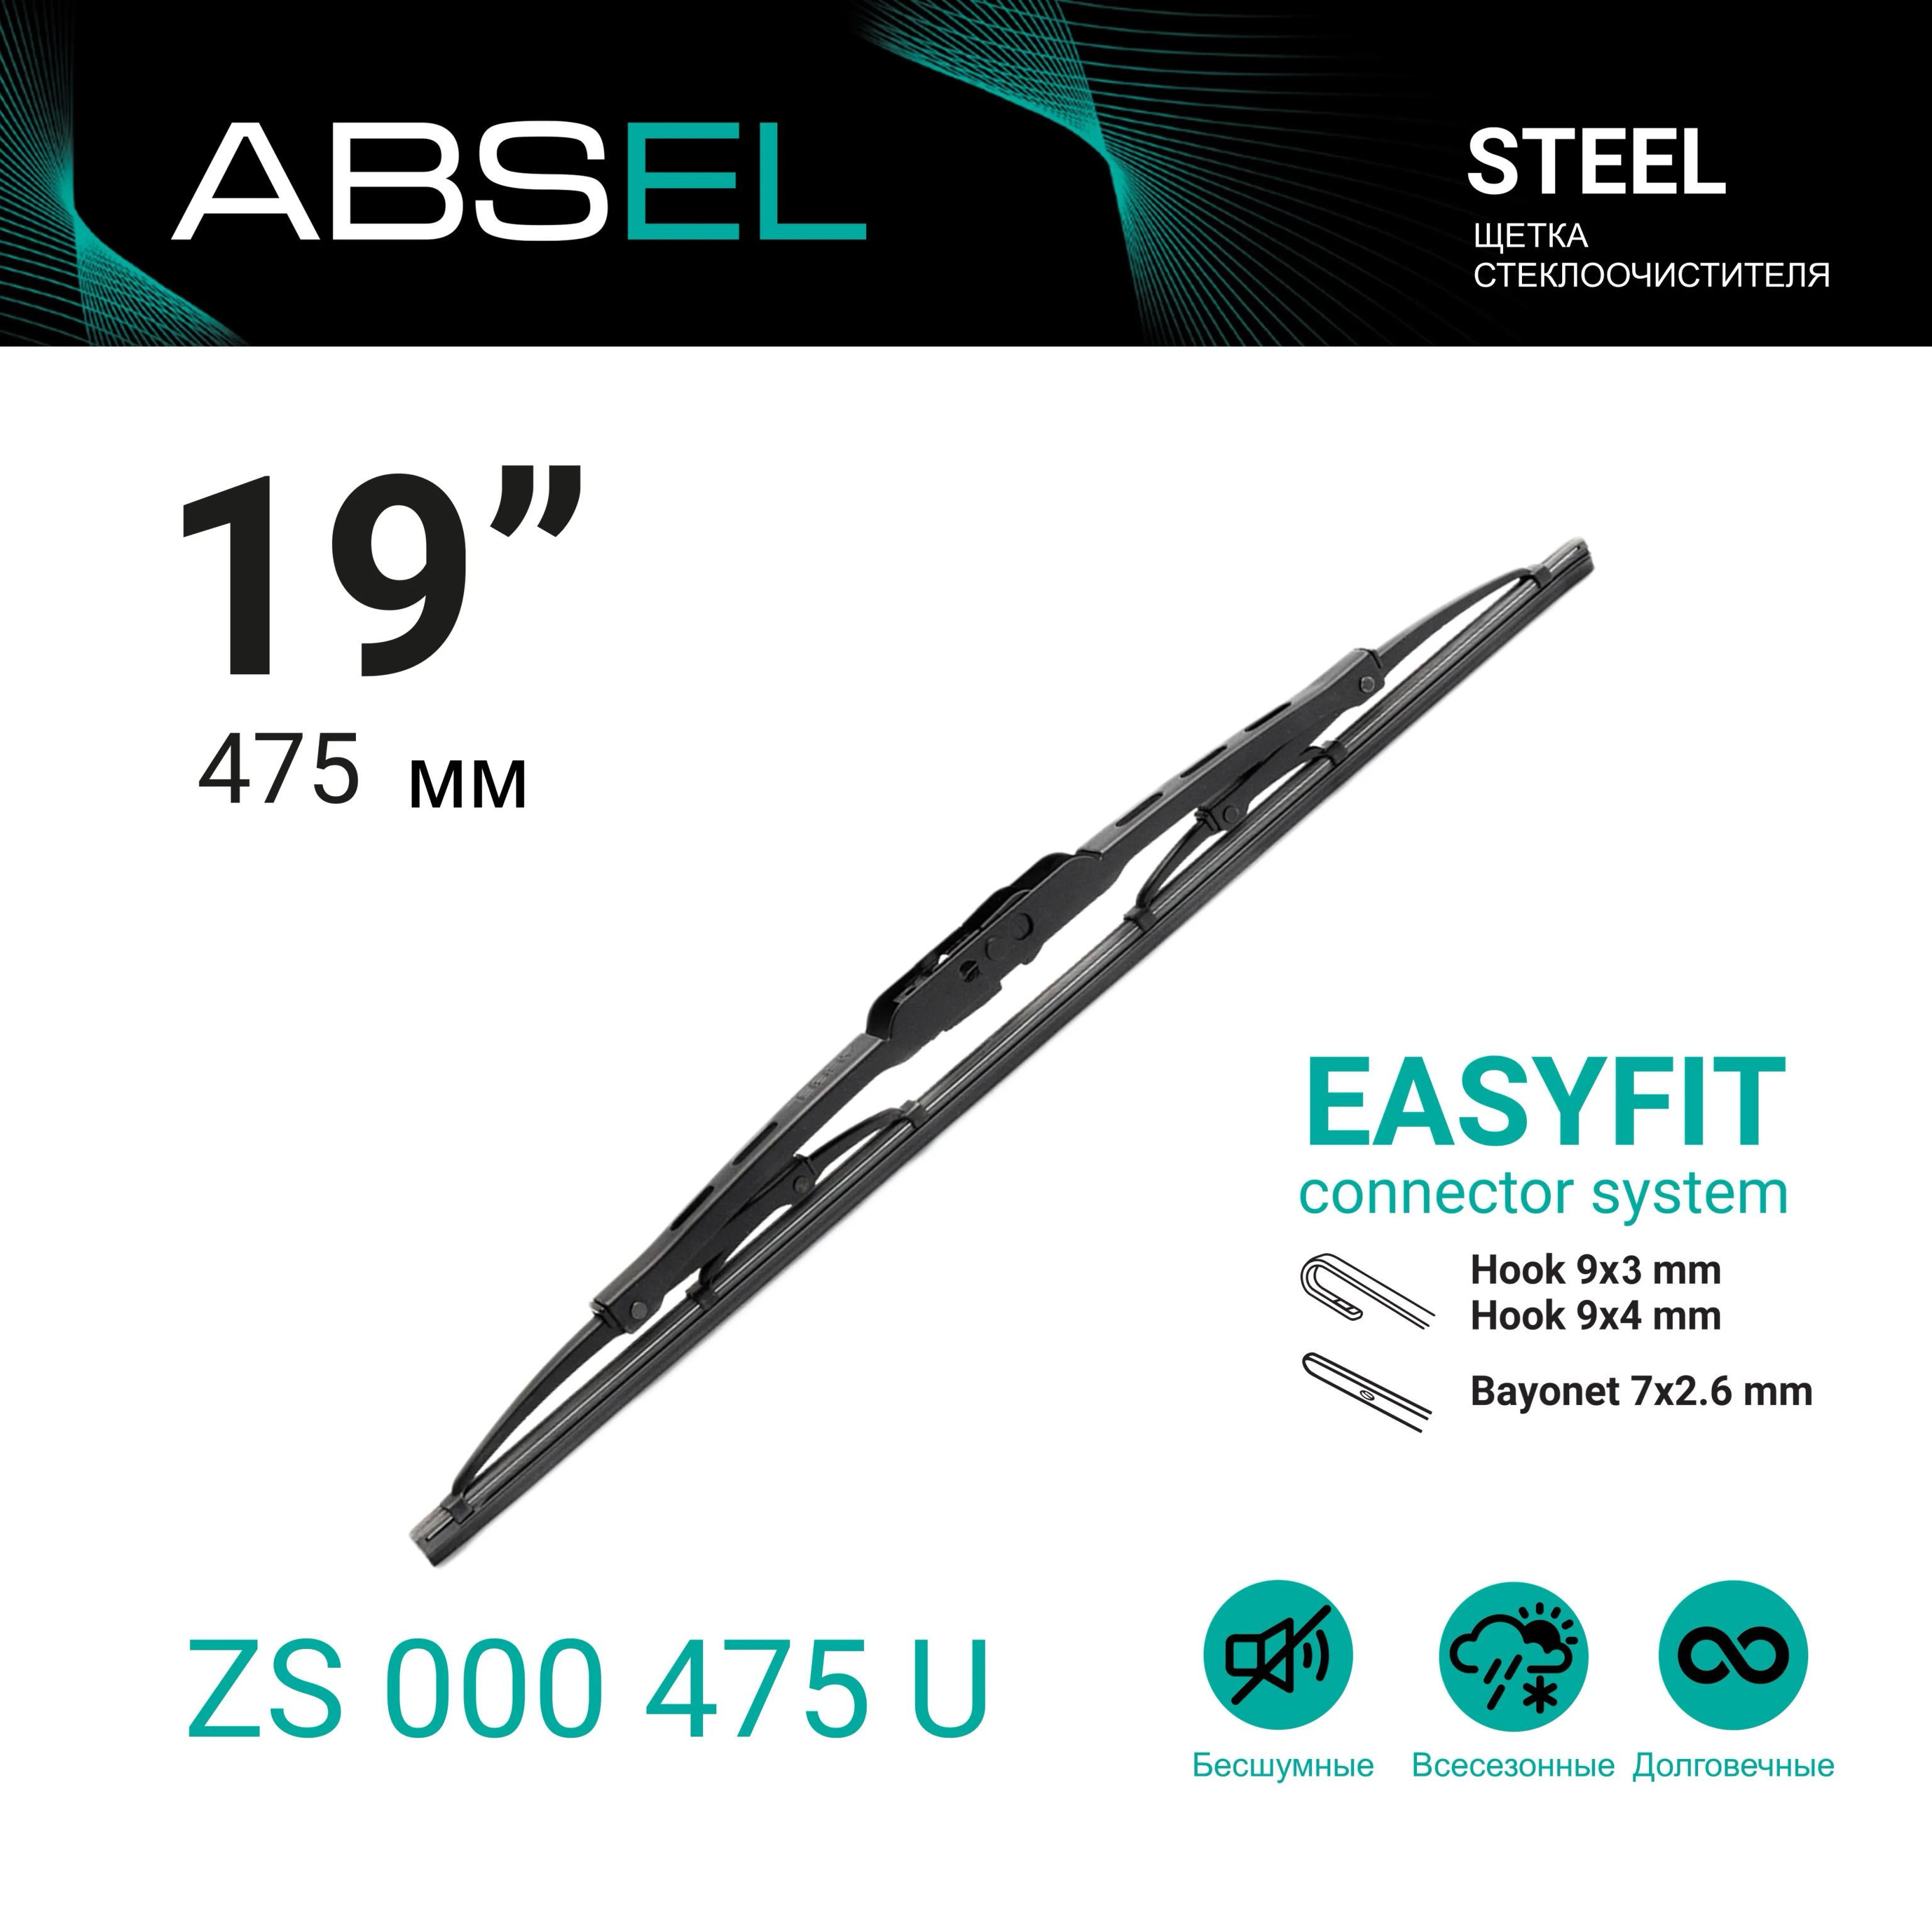 CONVENTIONAL METAL WIPER BLADE